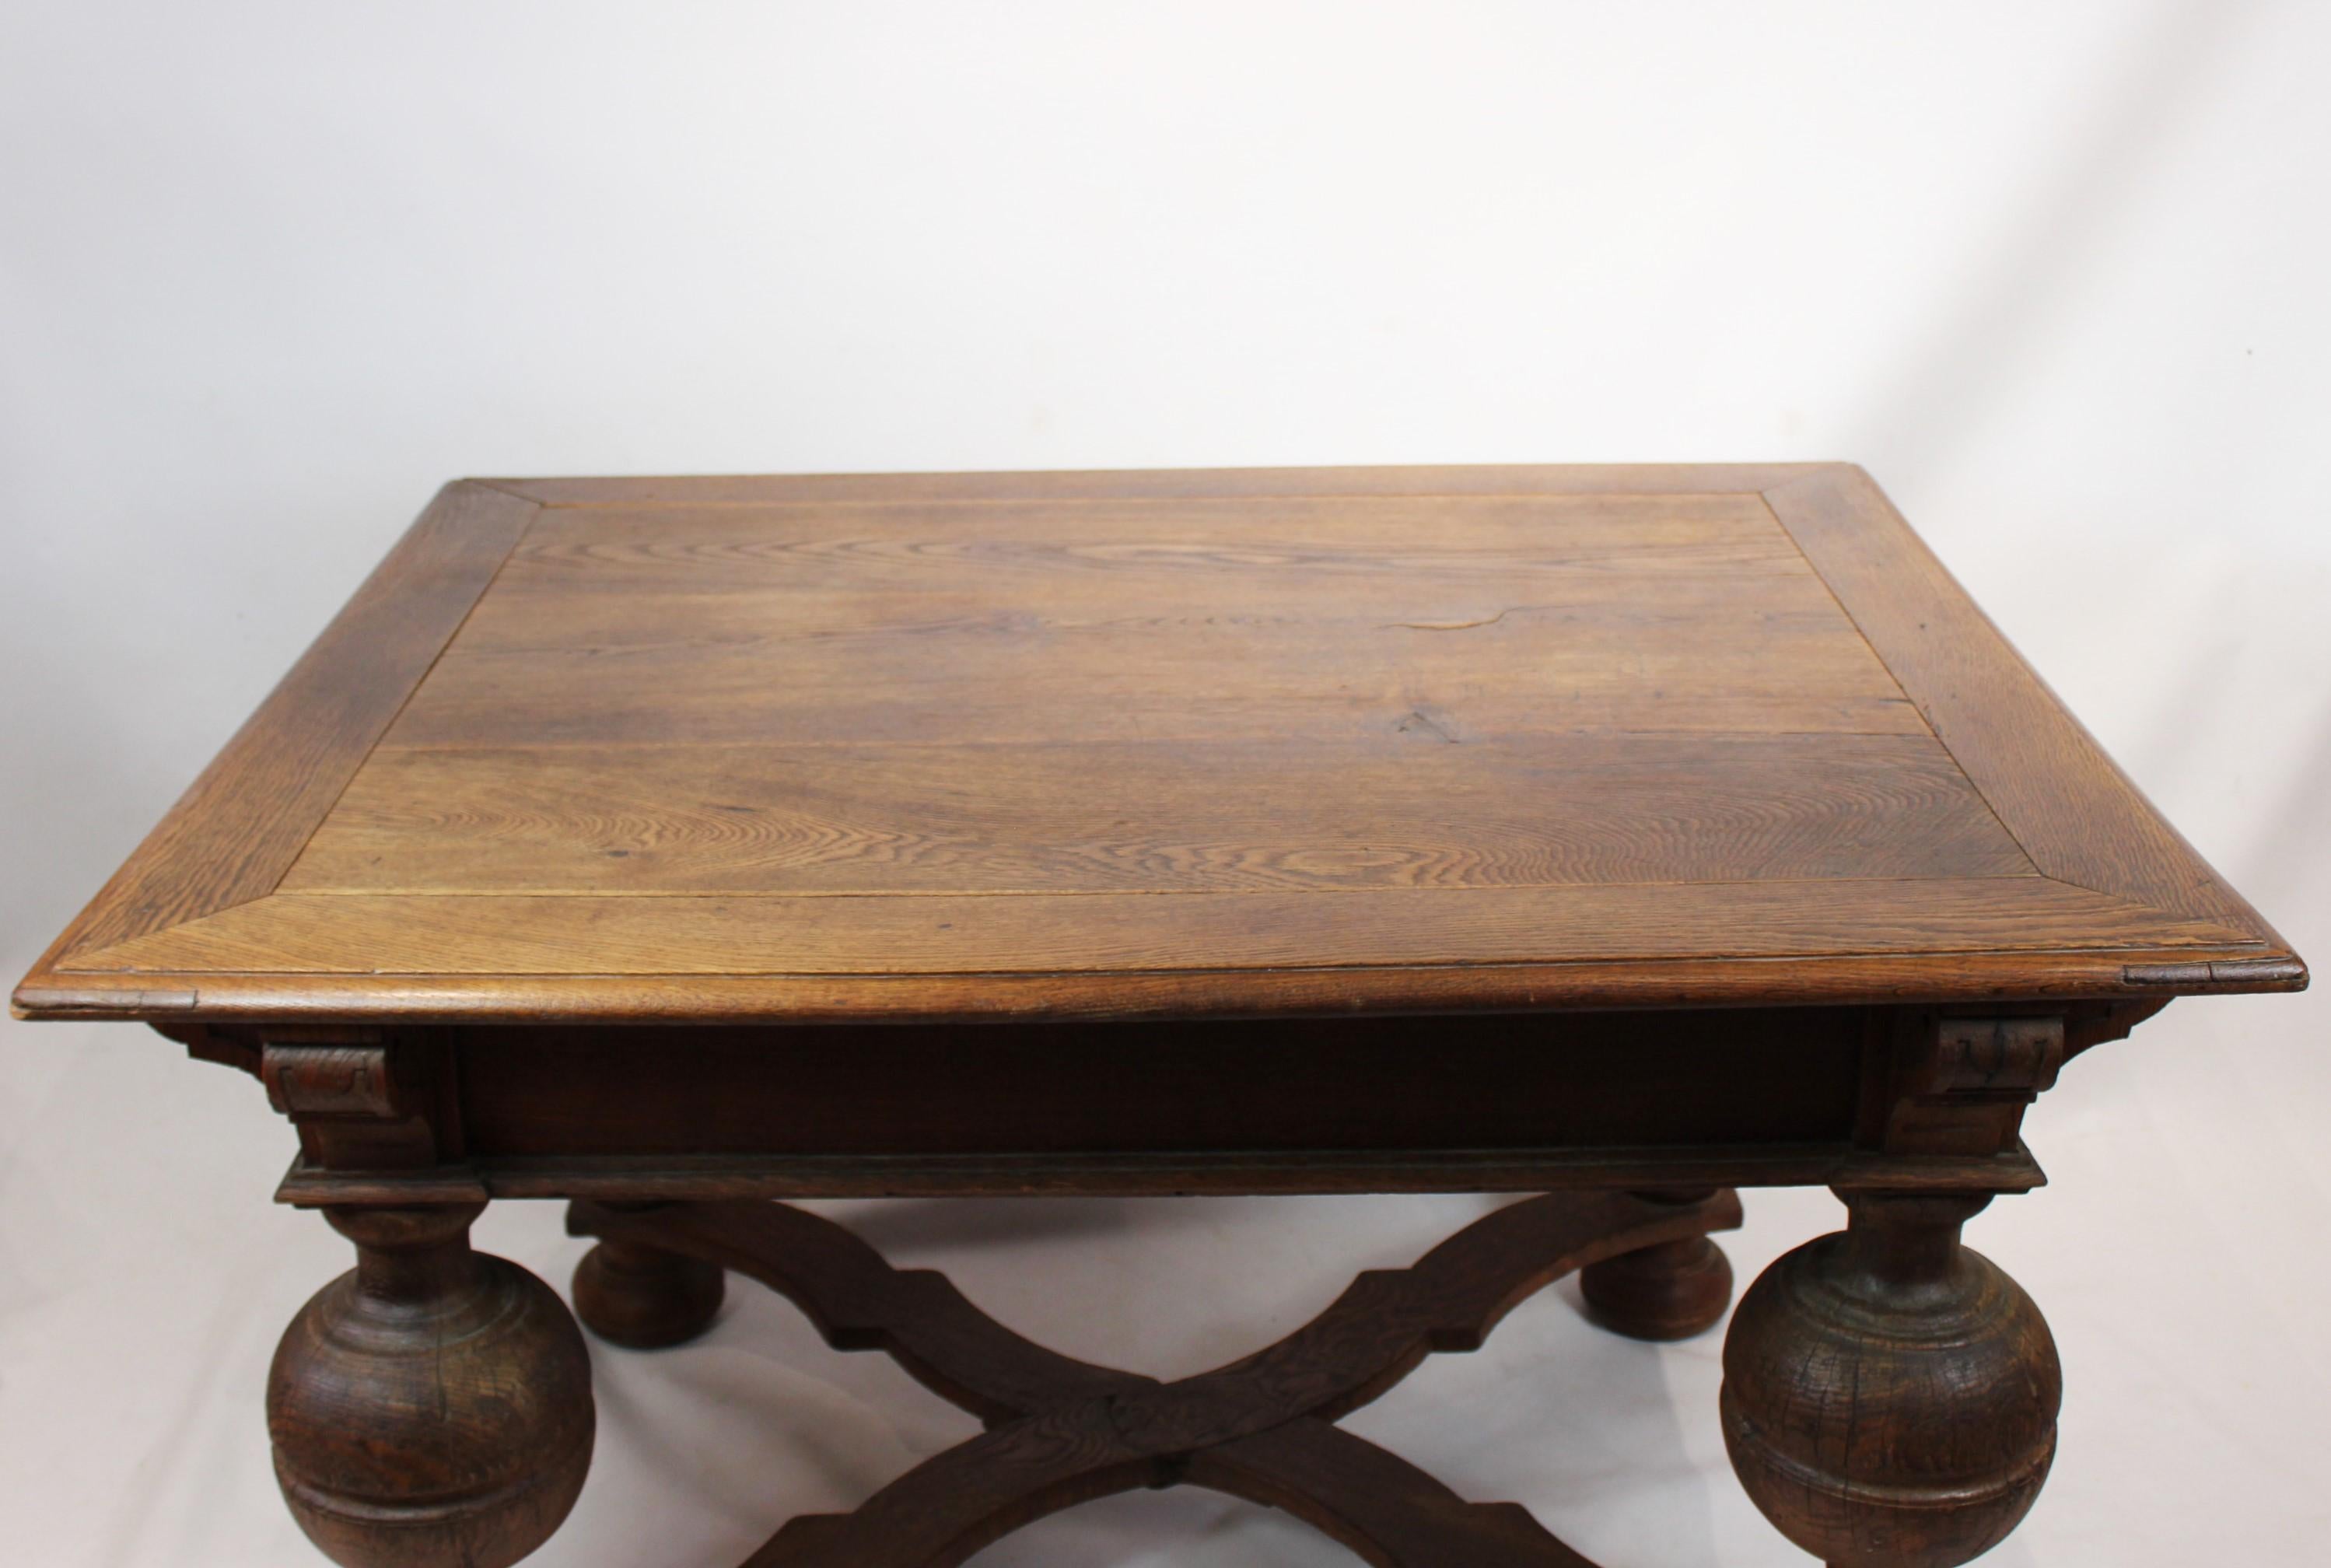 Large antique oak table from the 1860s suitable as dinner table or desk. The table is in great antique condition.